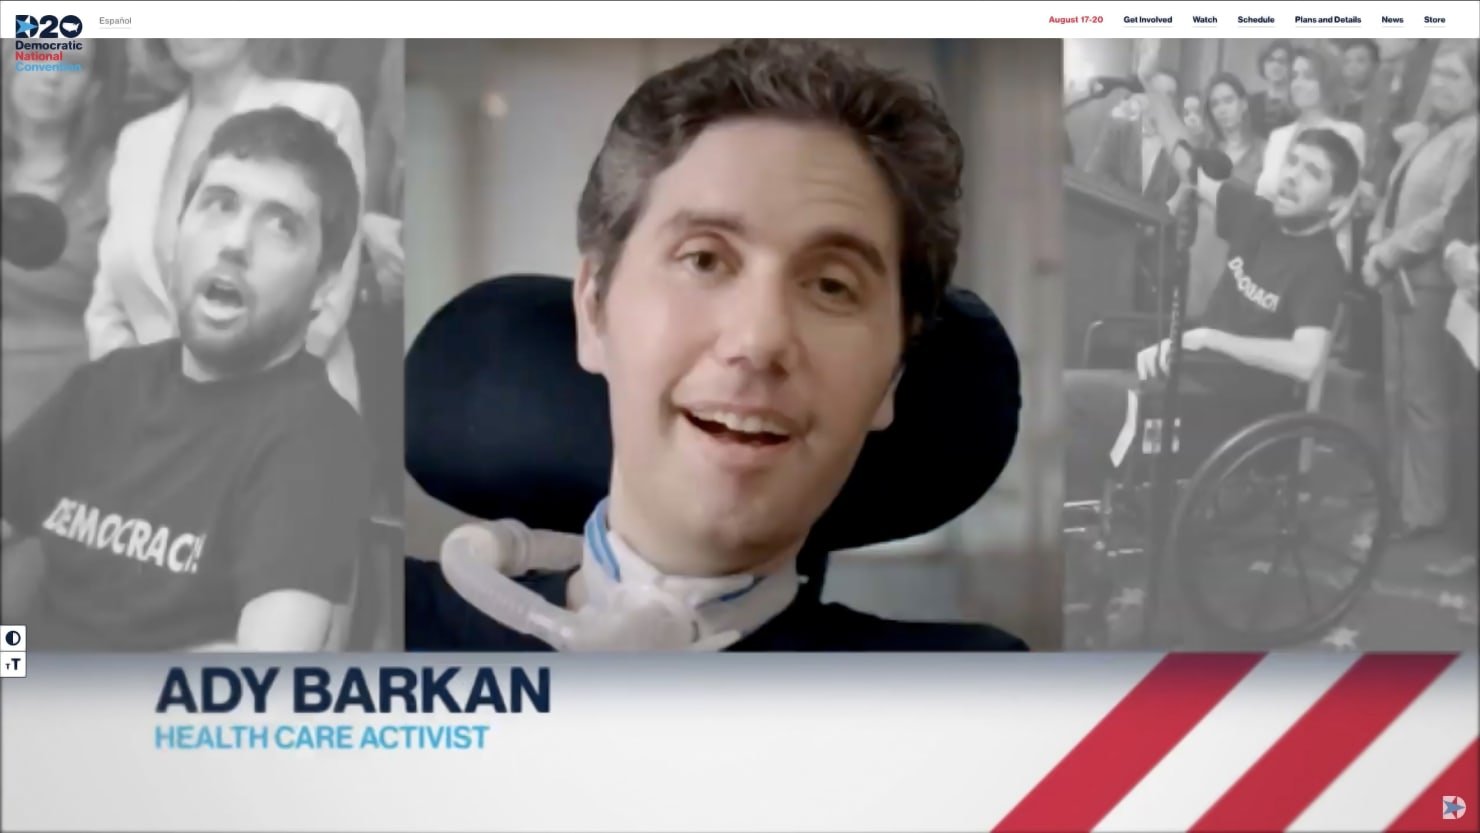 Ady Barkan, A Man Without a Voice, Delivers Most Powerful DNC 2020 Speech of Night 2